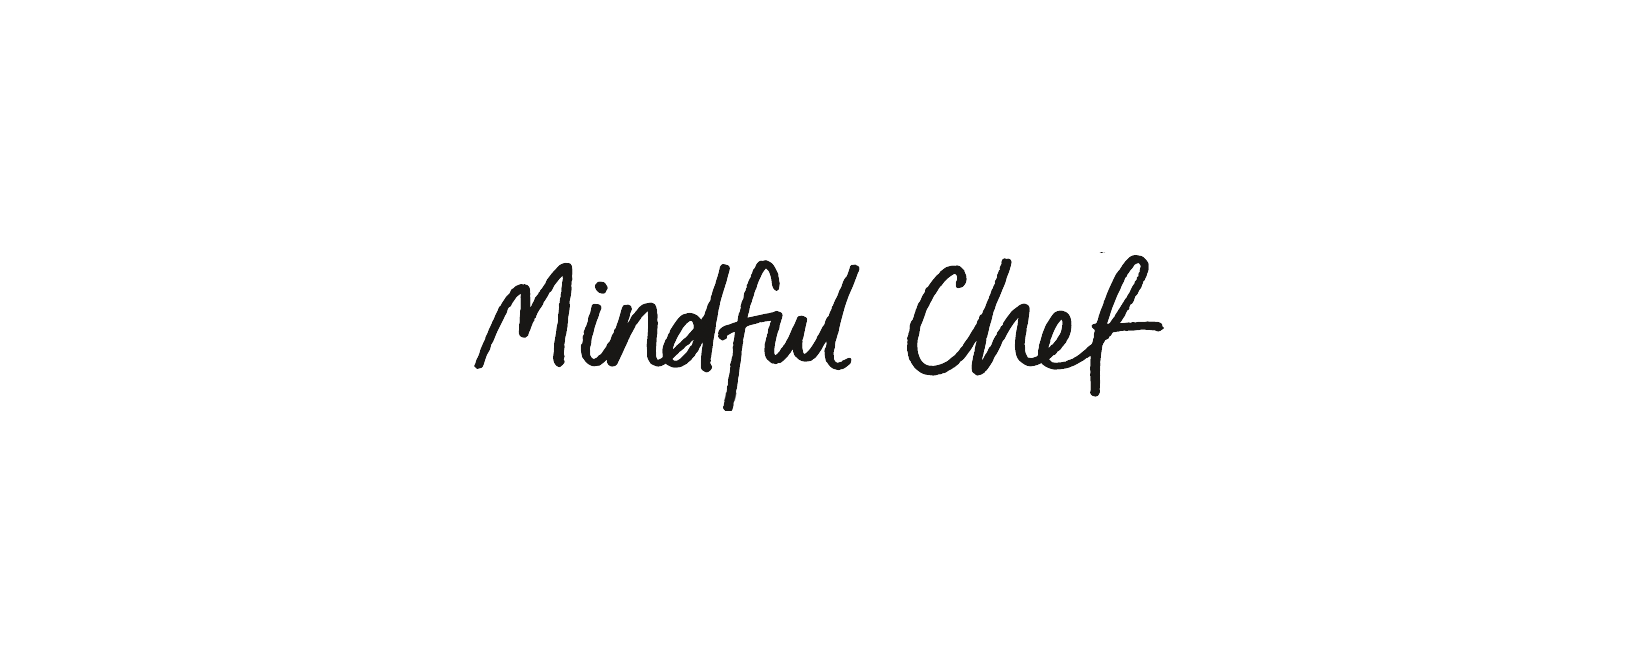 Mindful Chef Review – Live a Mindful Life!